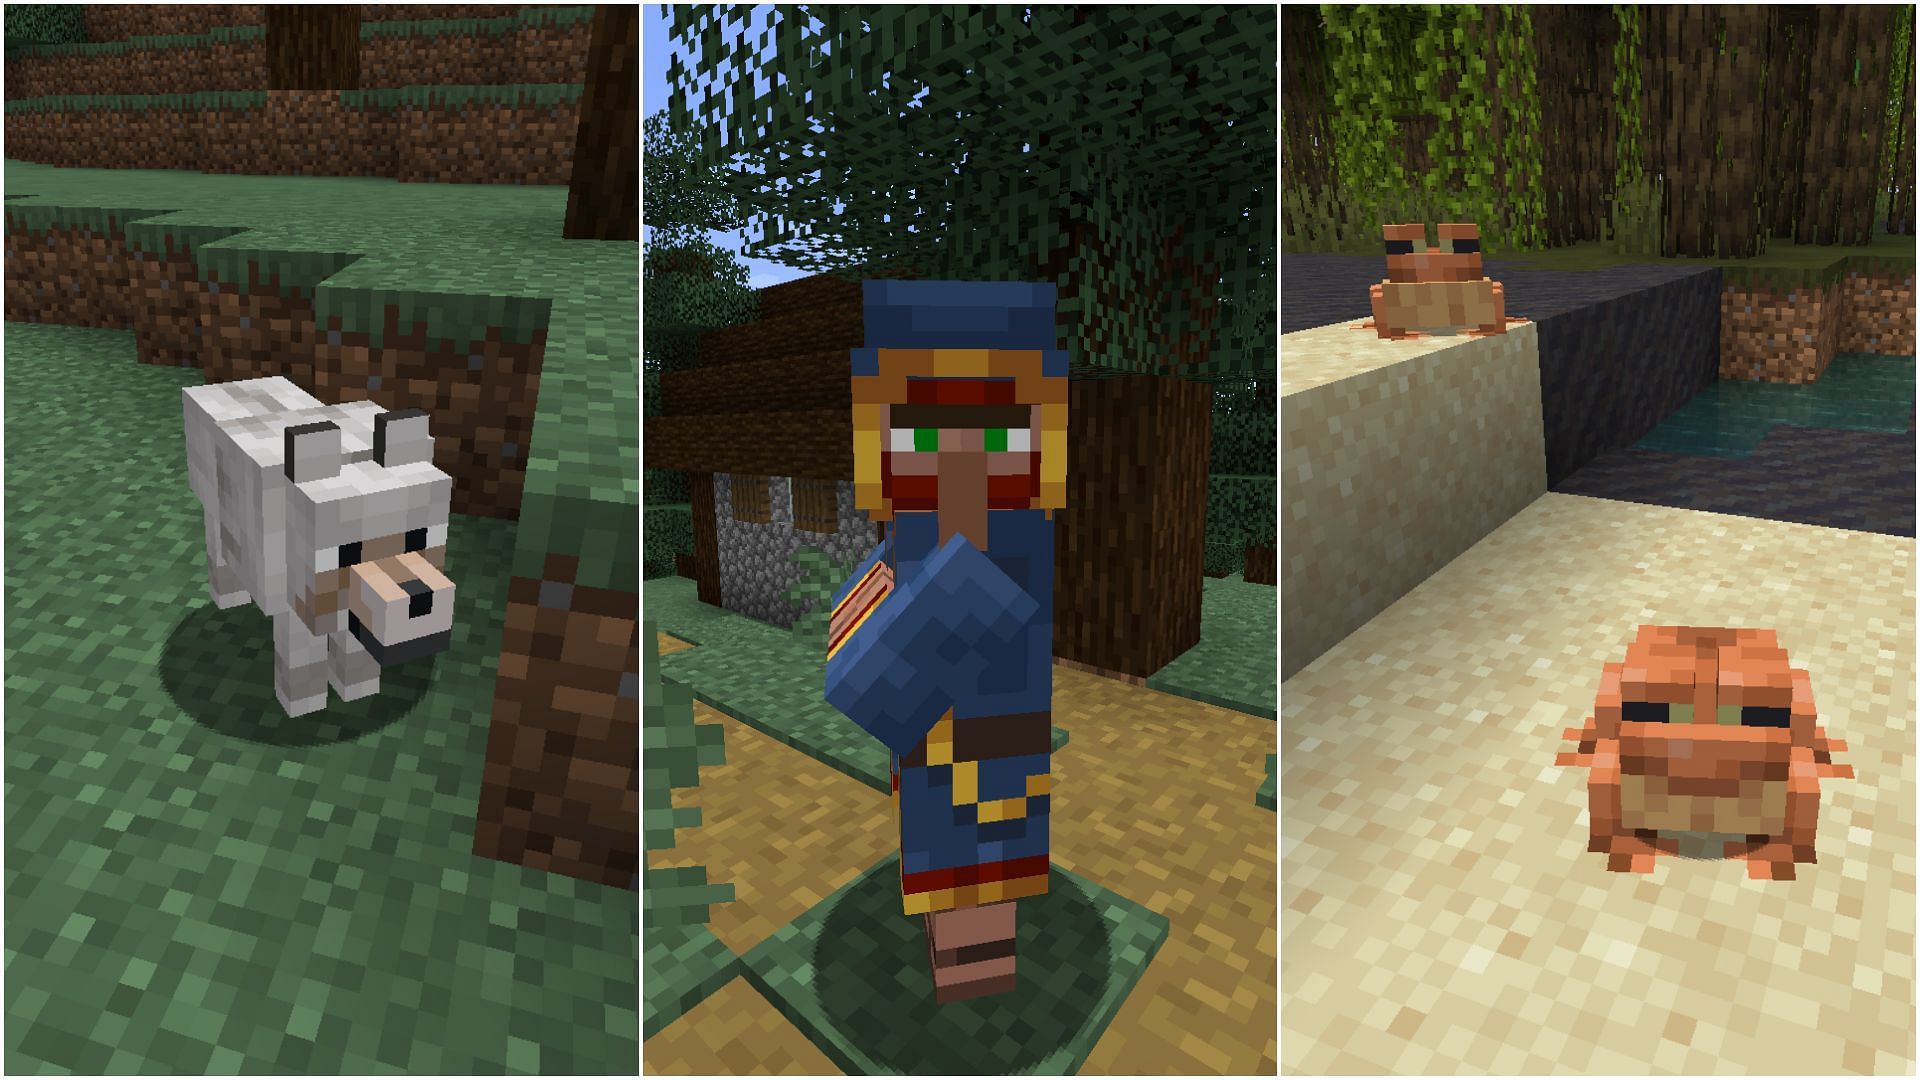 The overworld is filled with all kinds of mobs in Minecraft 1.19 (Image via Sportskeeda)